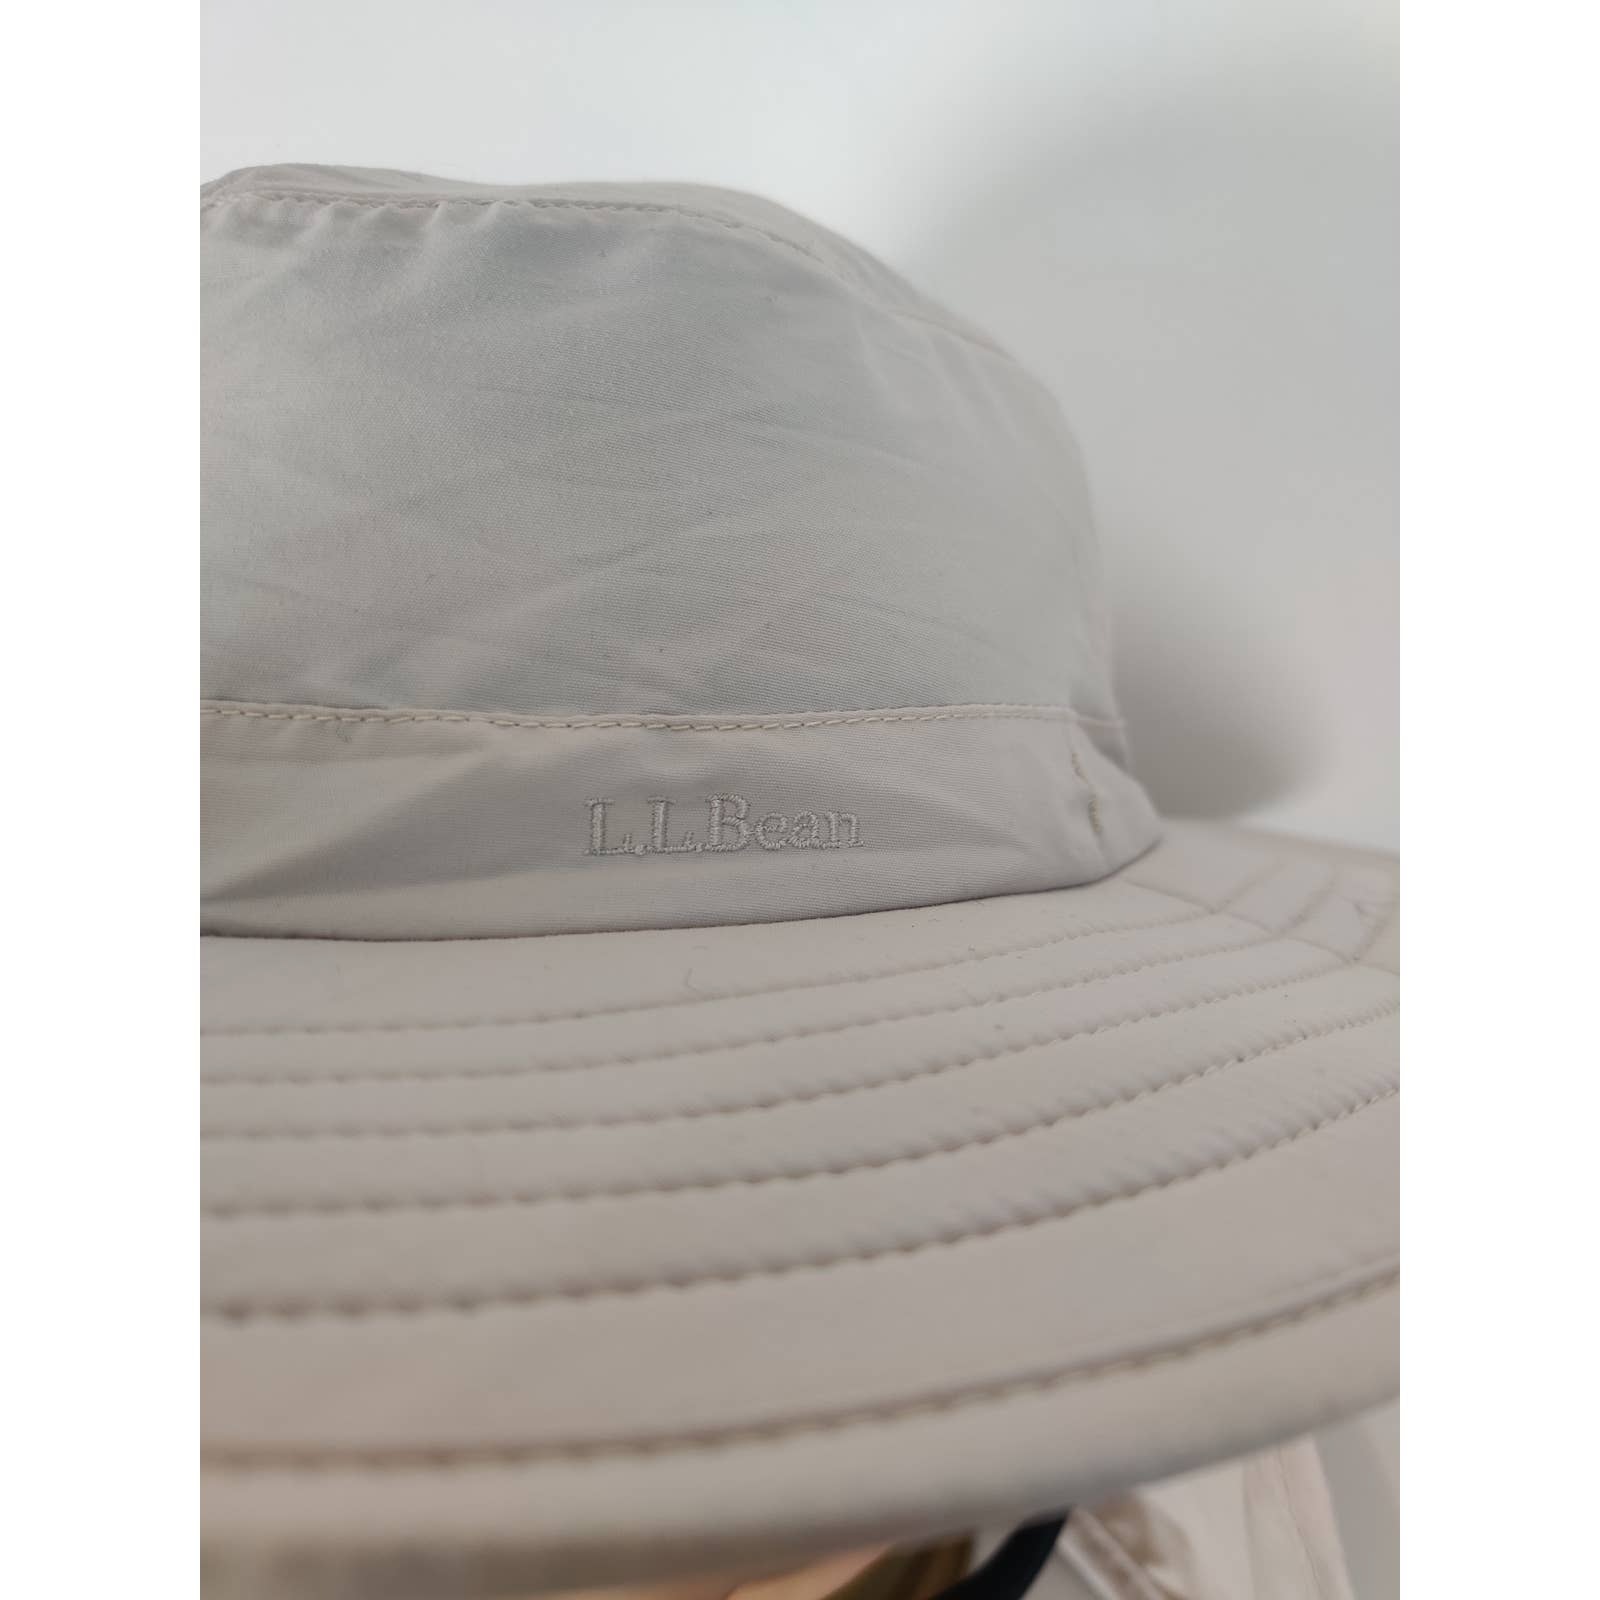 (V) L.L Bean Unisex hat beach hiking summer cream adjustable OS - Picture 9 of 12